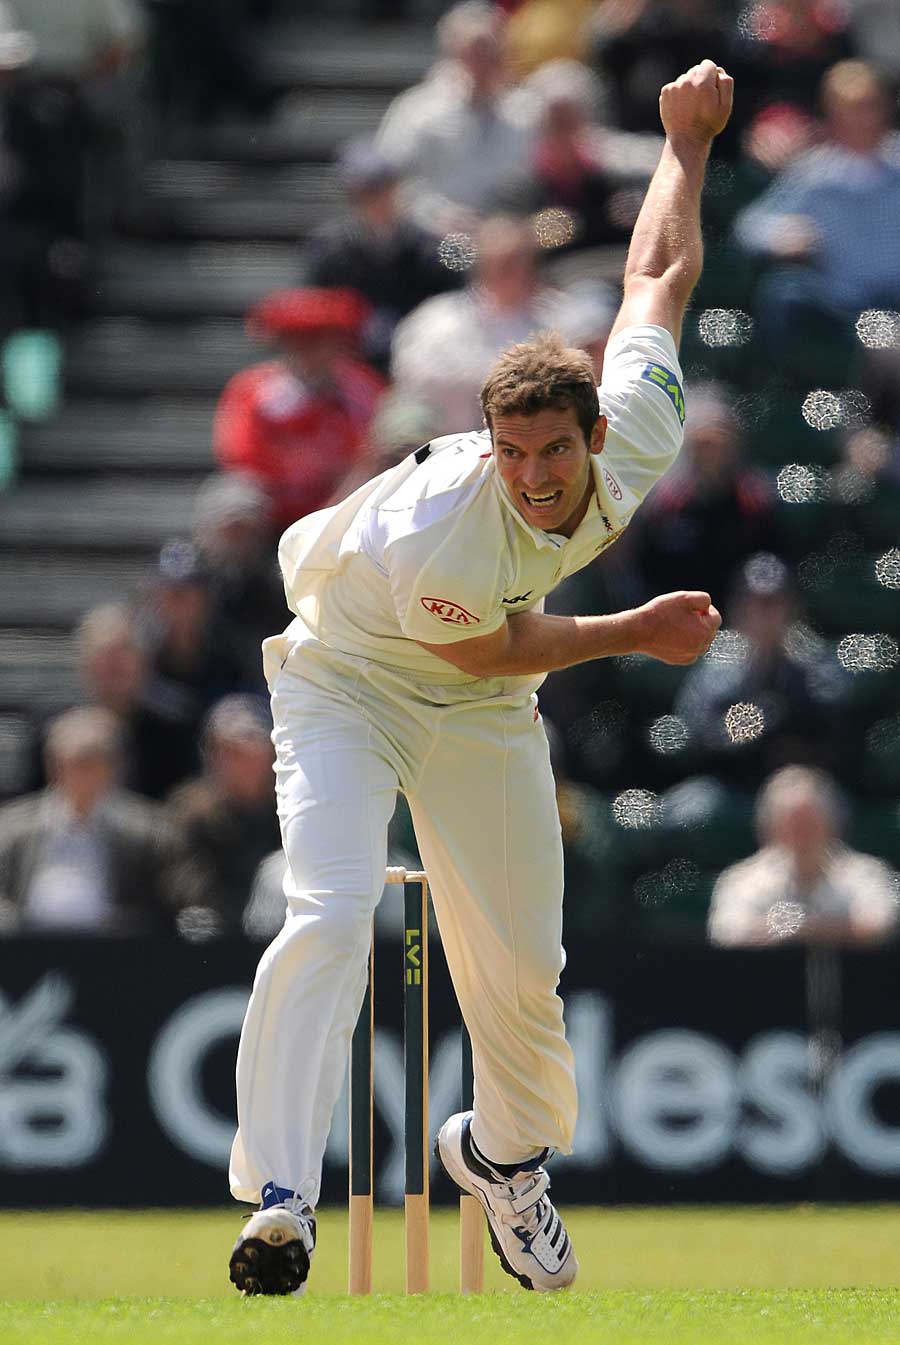 Chris Tremlett was back in Championship action for Surrey